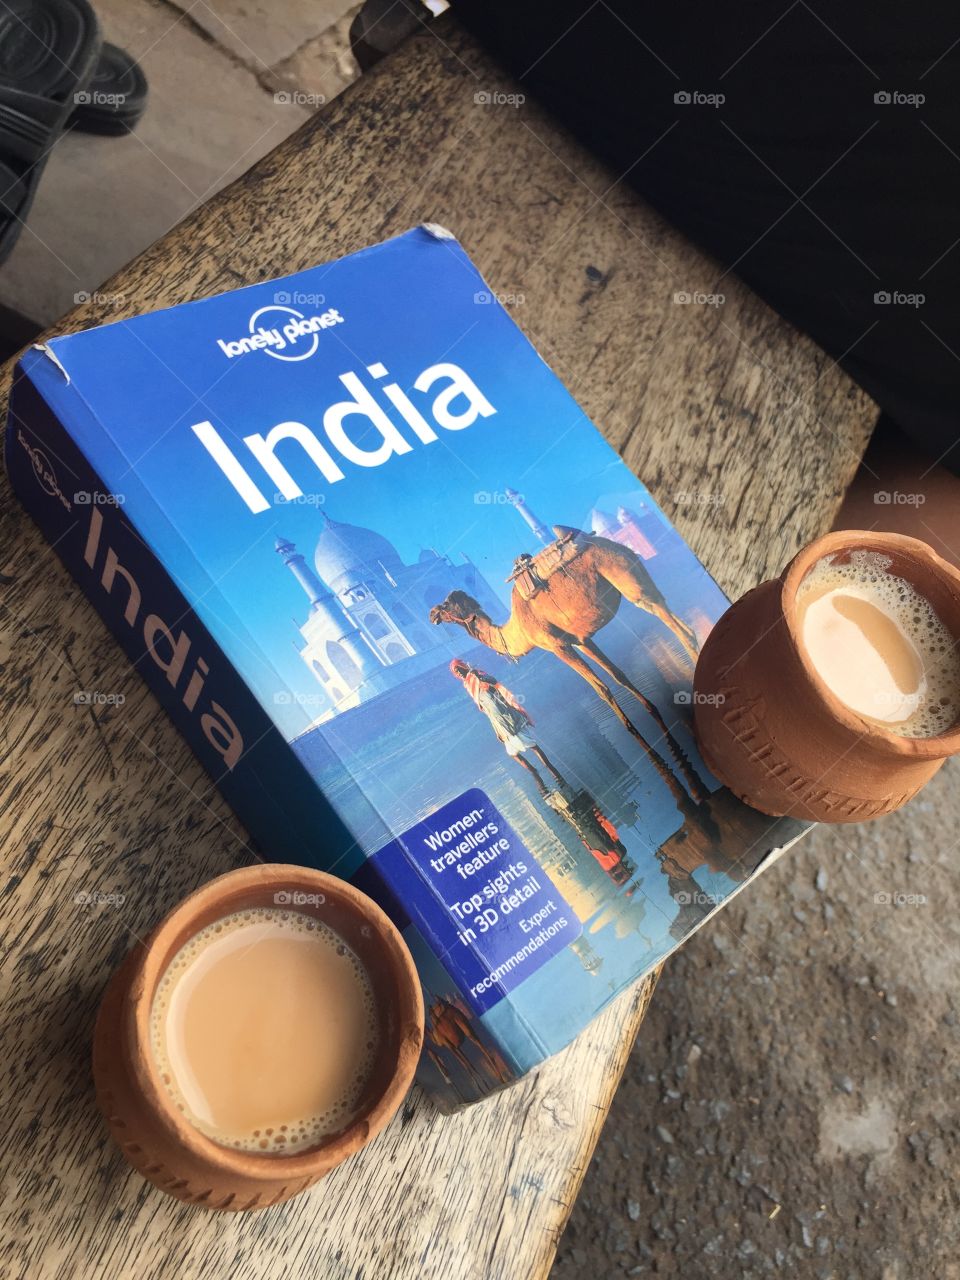 Enjoying chai tea at every street stall while traveling India! 